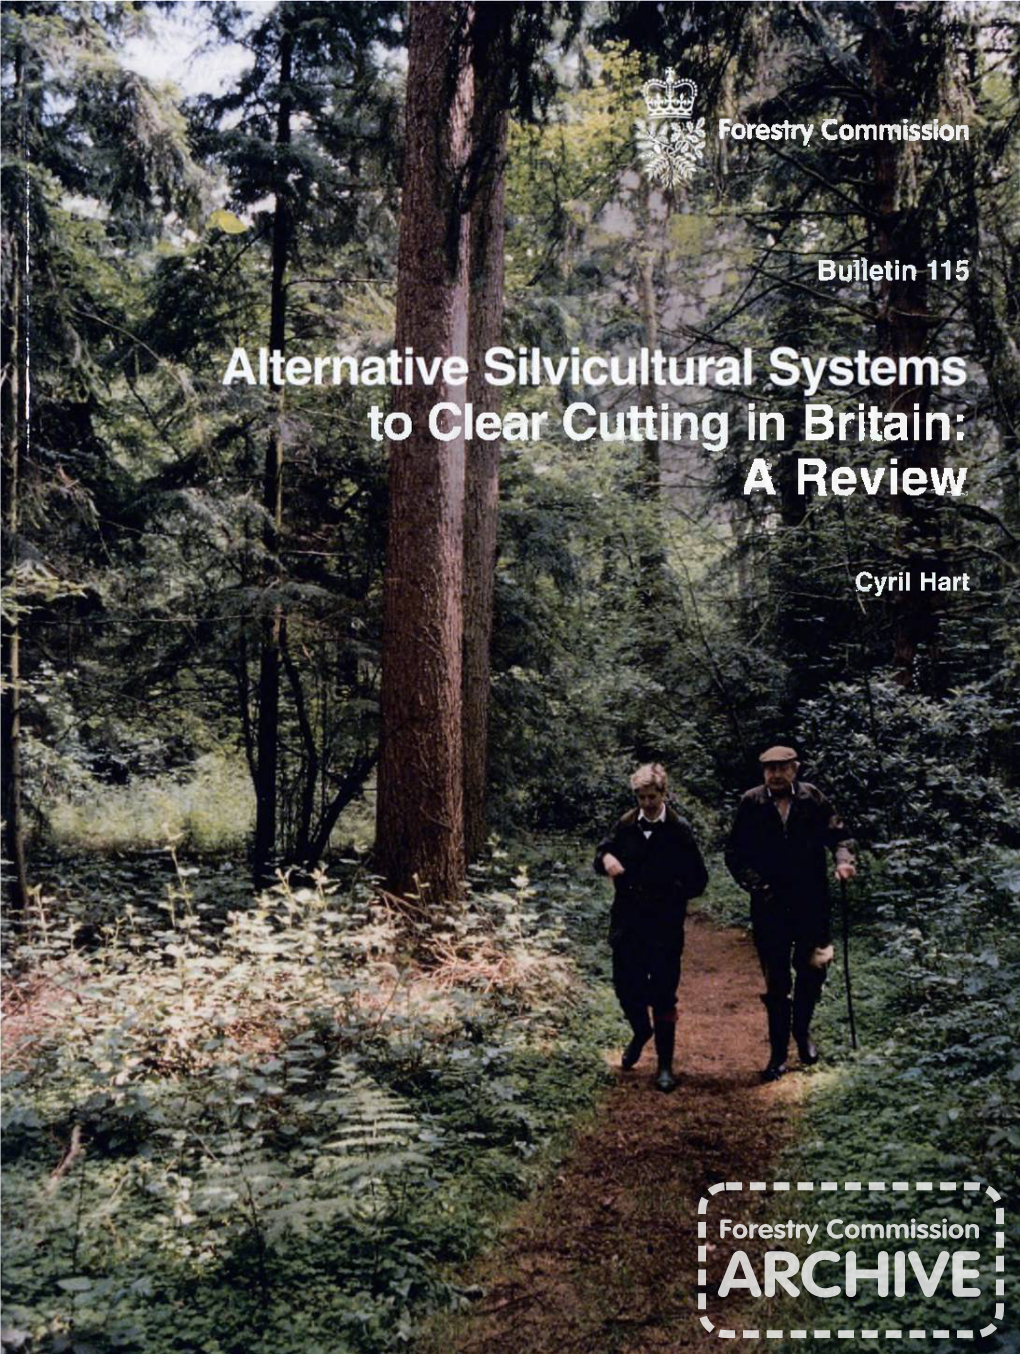 Forestry Commission Bulletin: Alternative Silvicultural Systems to Clear Cutting in Britain: a Review